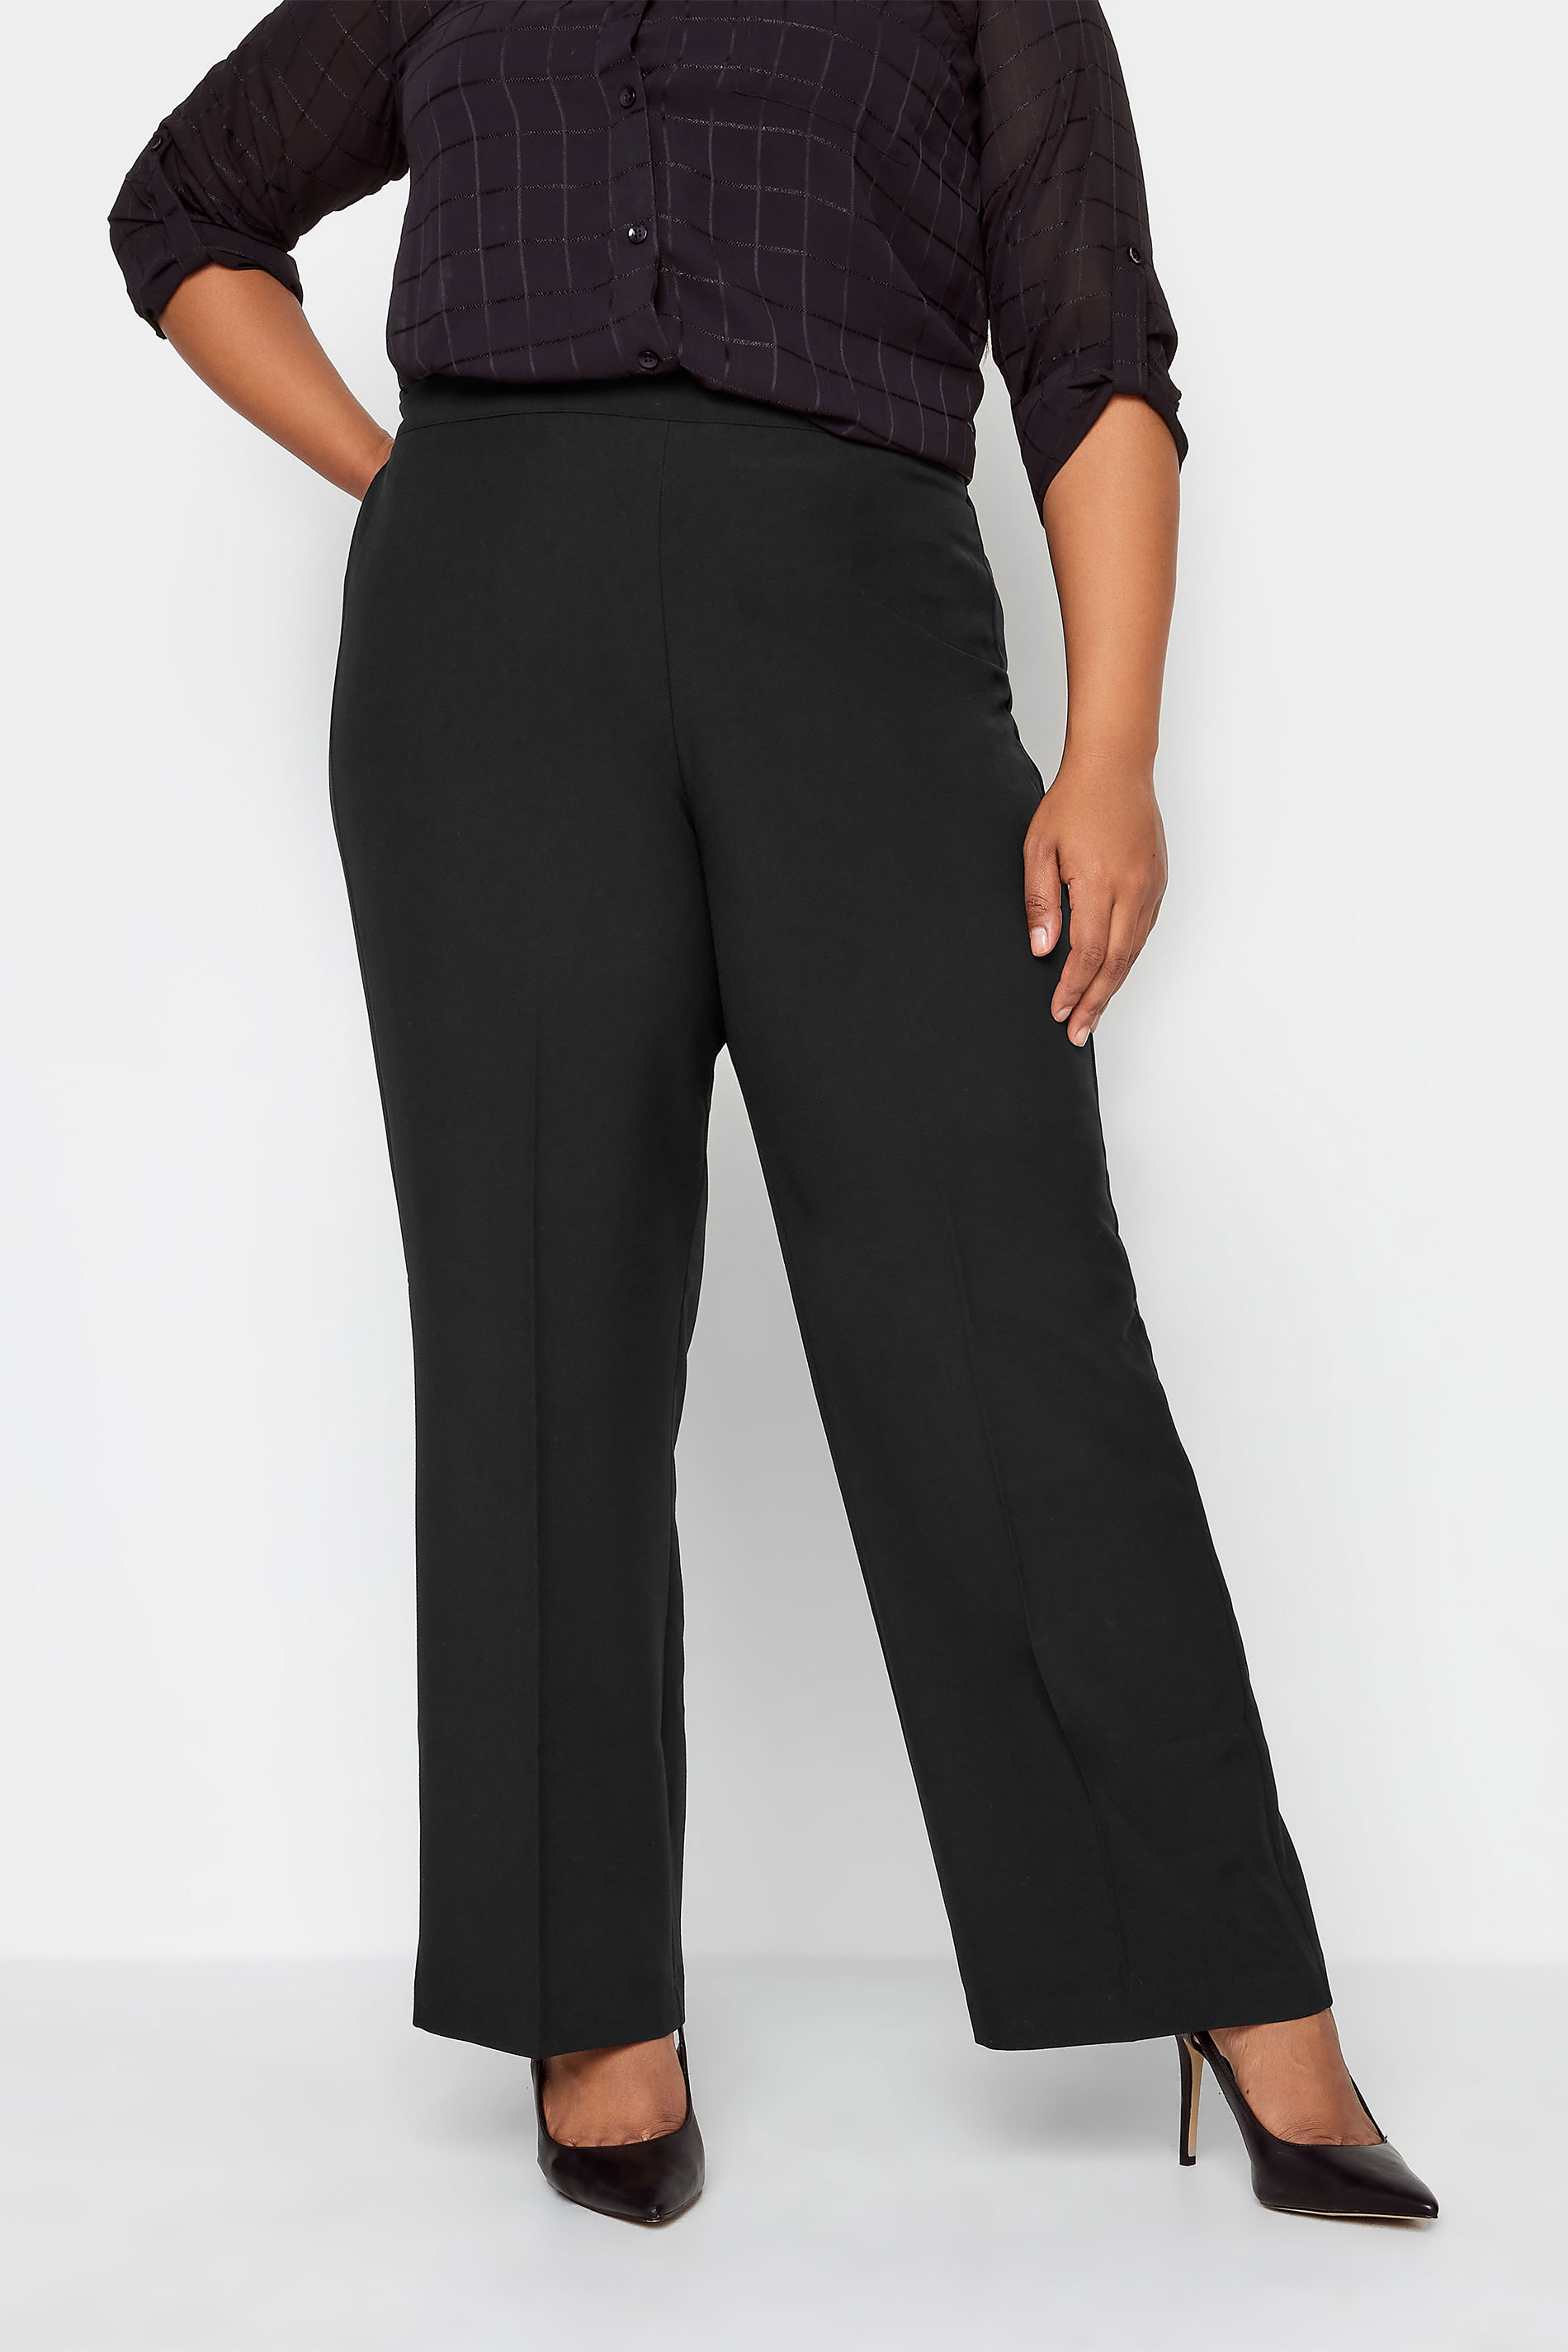 Plus Size Black Elasticated Stretch Straight Leg Trousers | Yours Clothing 1